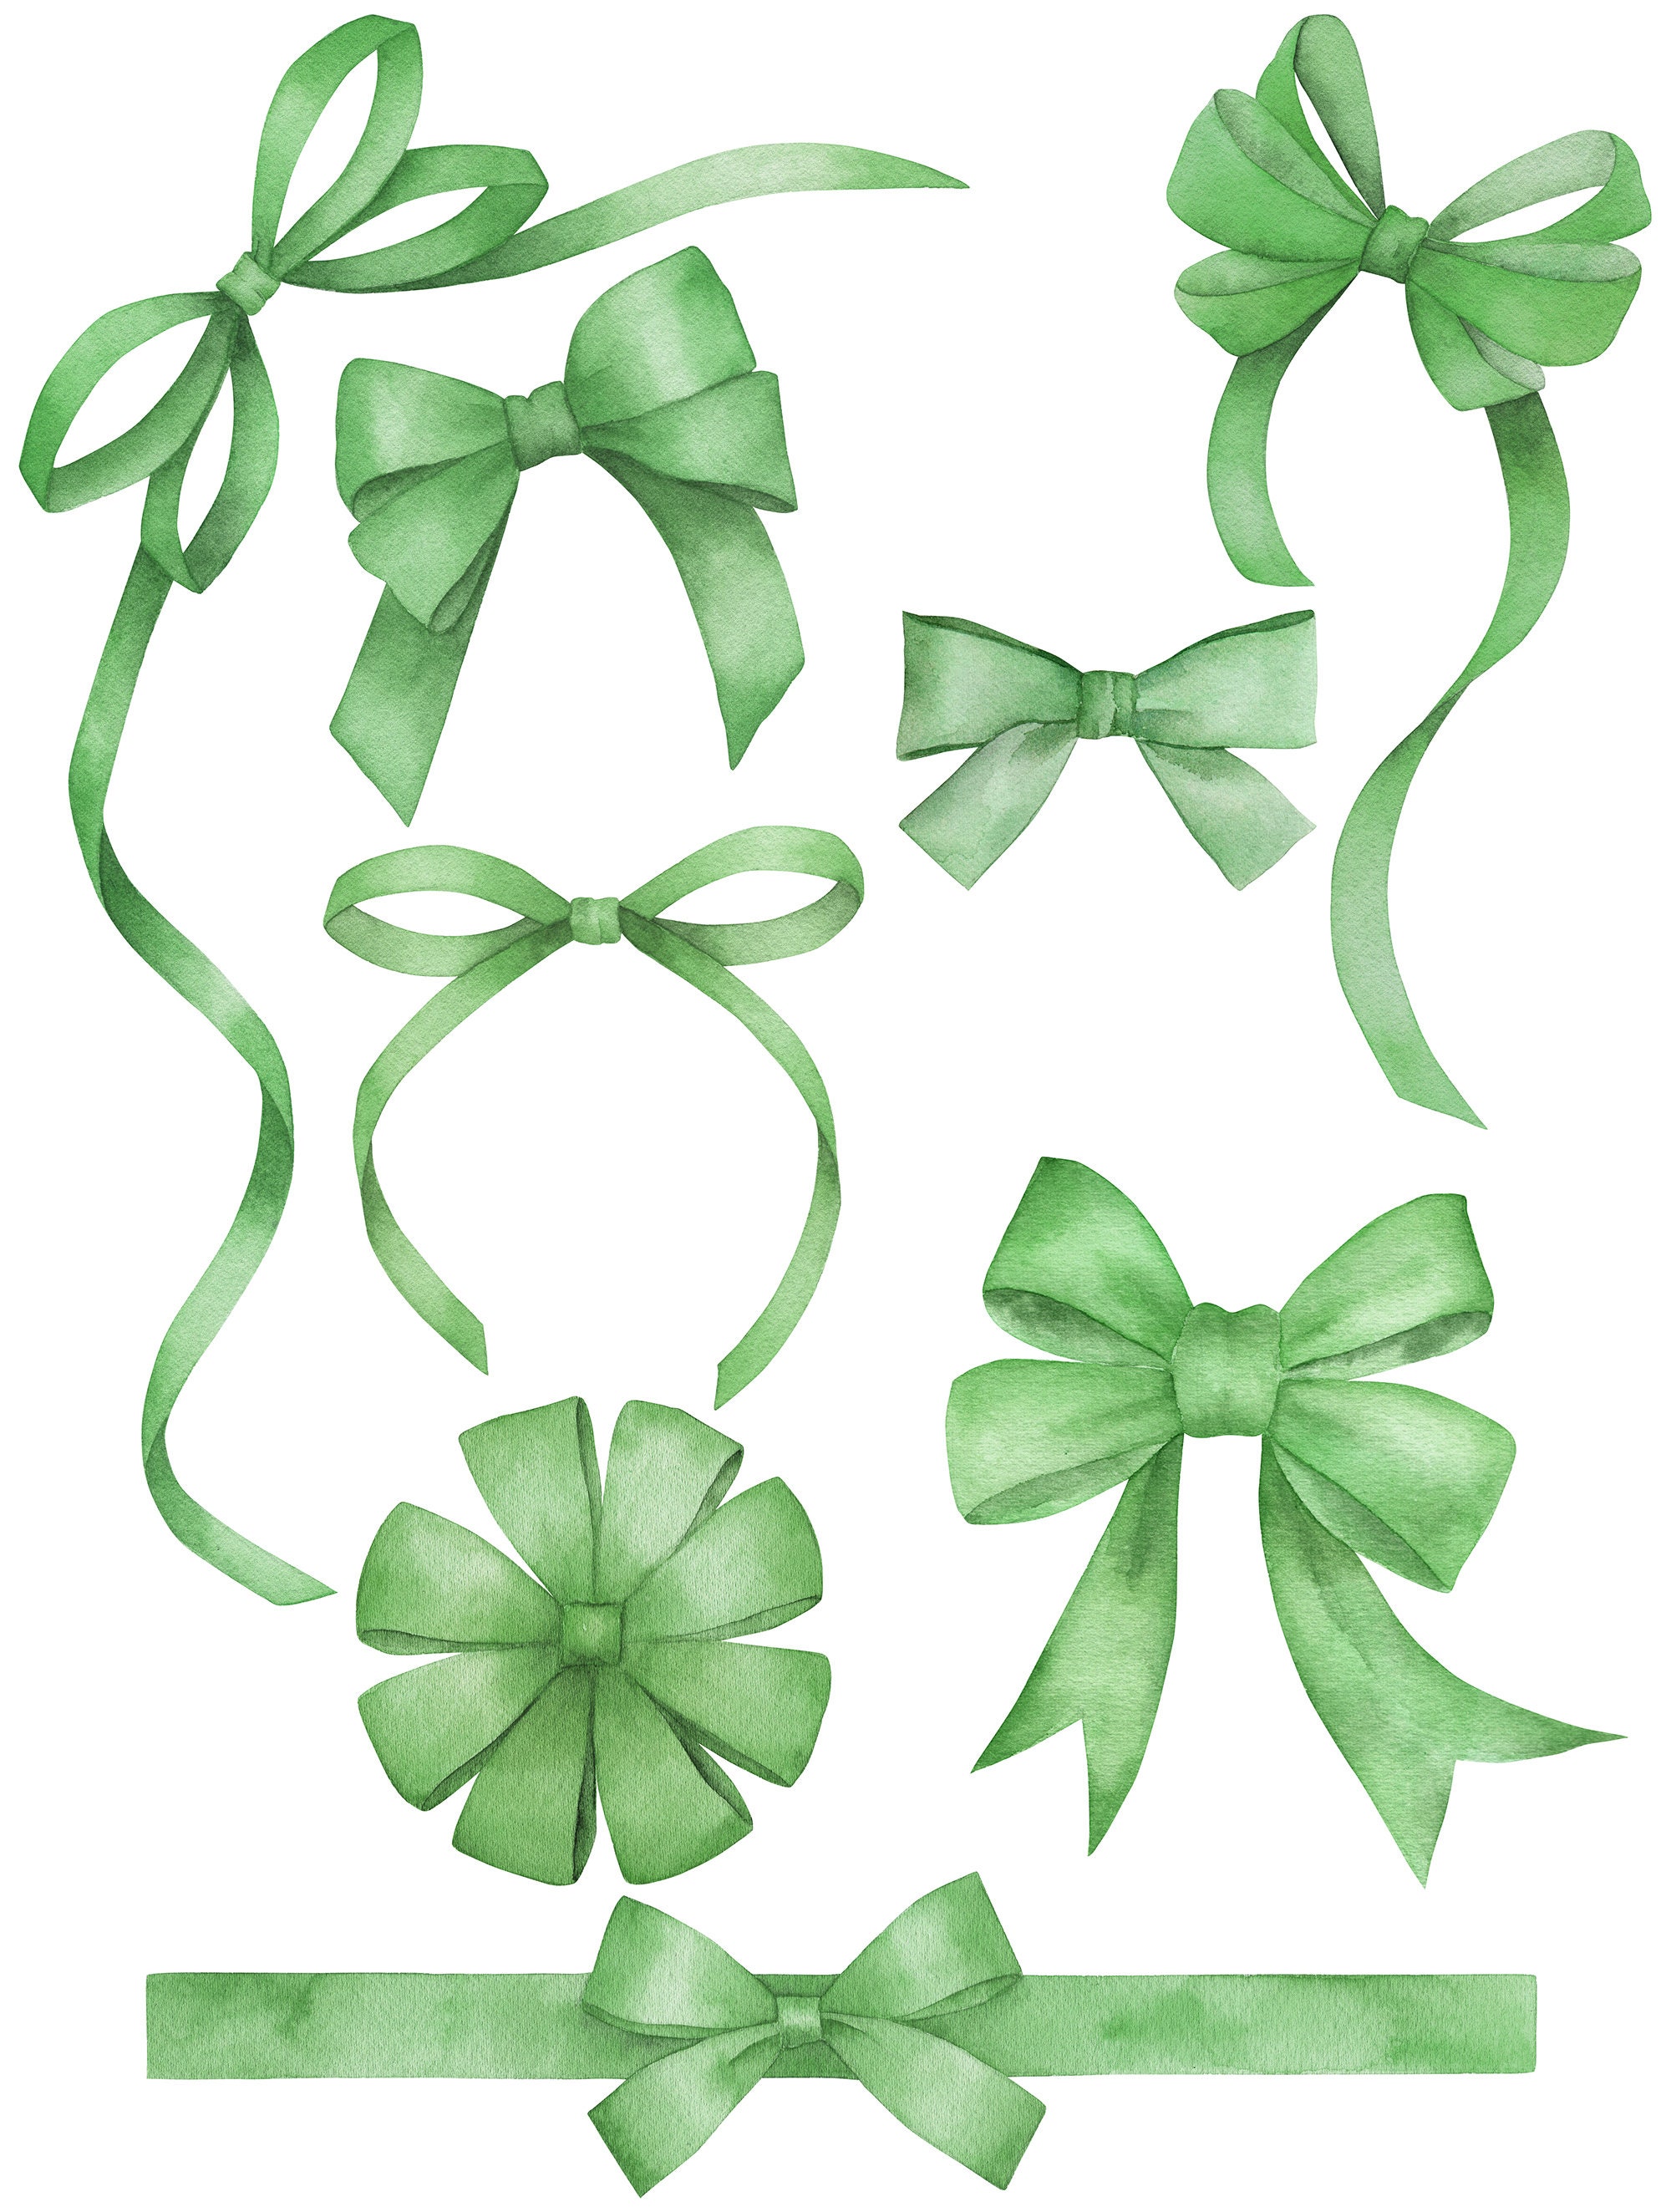 Watercolor Green Ribbon Banner Clipart Graphic by AchitaStudio